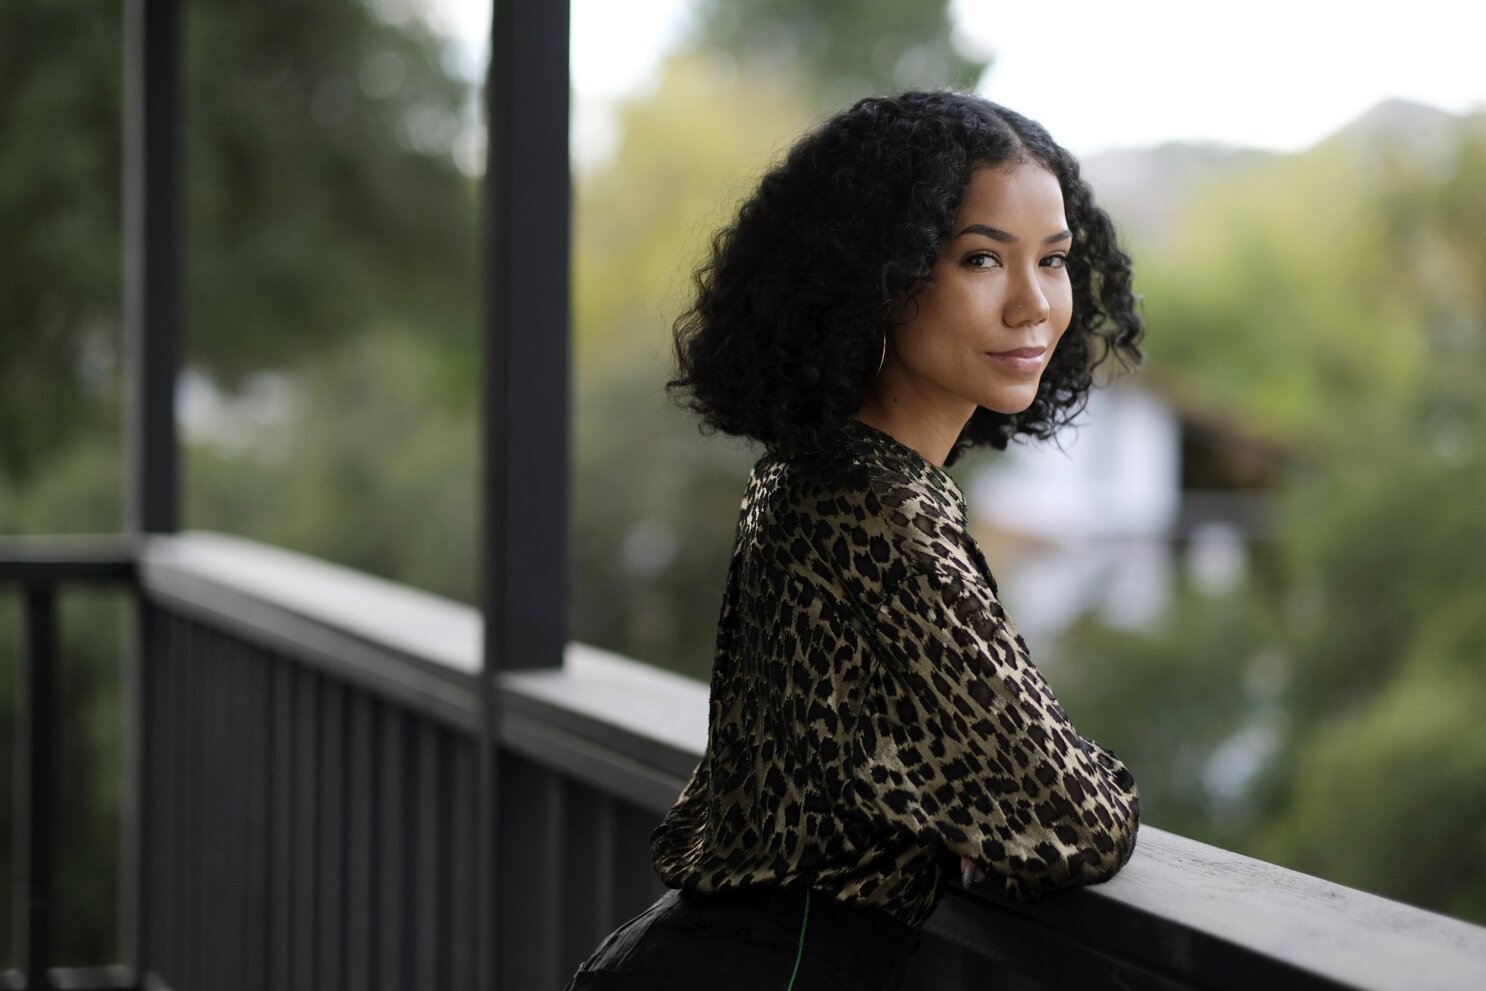 Via songwriting and freestyling, Jhené Aiko finds her voice | AP News